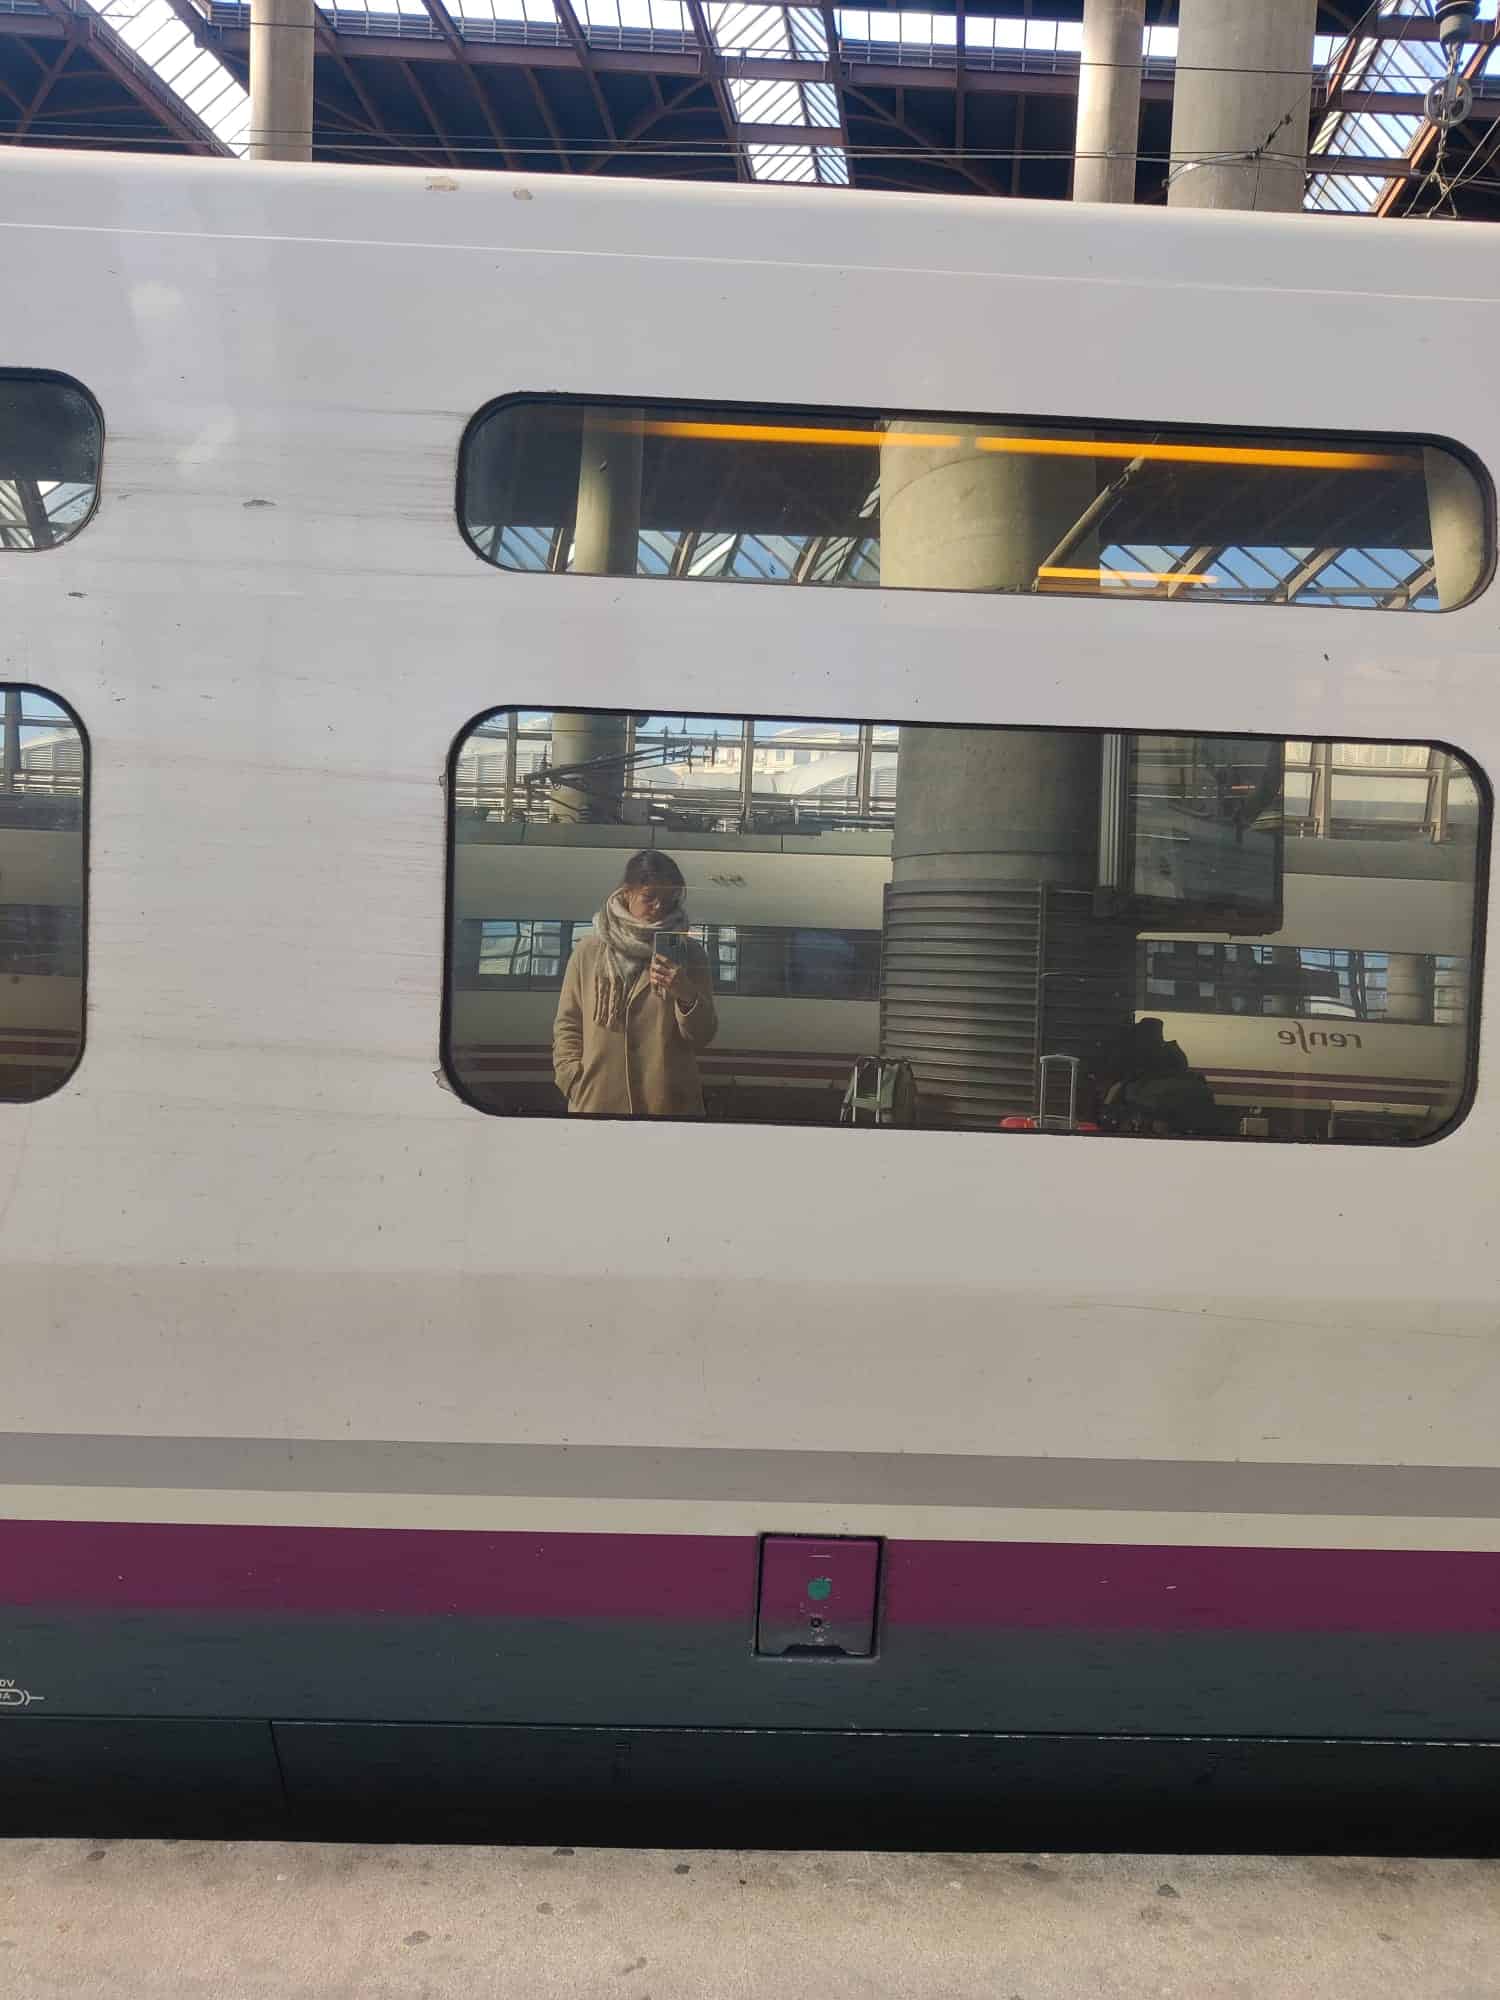 Helena Calvo stands opposite a Renfe AVE train at a platform